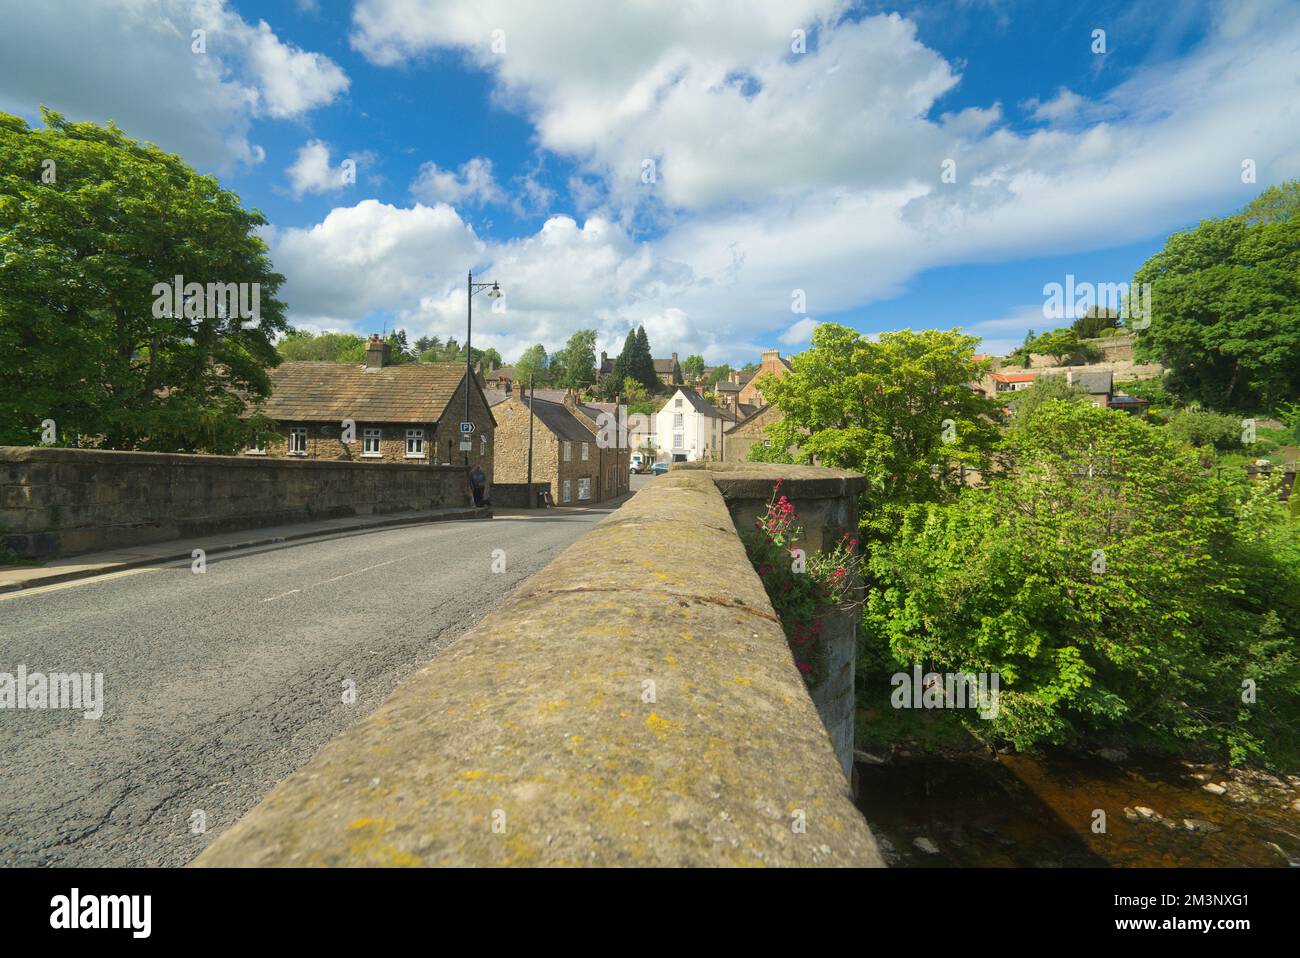 Richmond; River; Swale; old stone road Bridge on Bridge Street over river Swale. Looking North to    Richmond town, North Yorkshire England UK Stock Photo